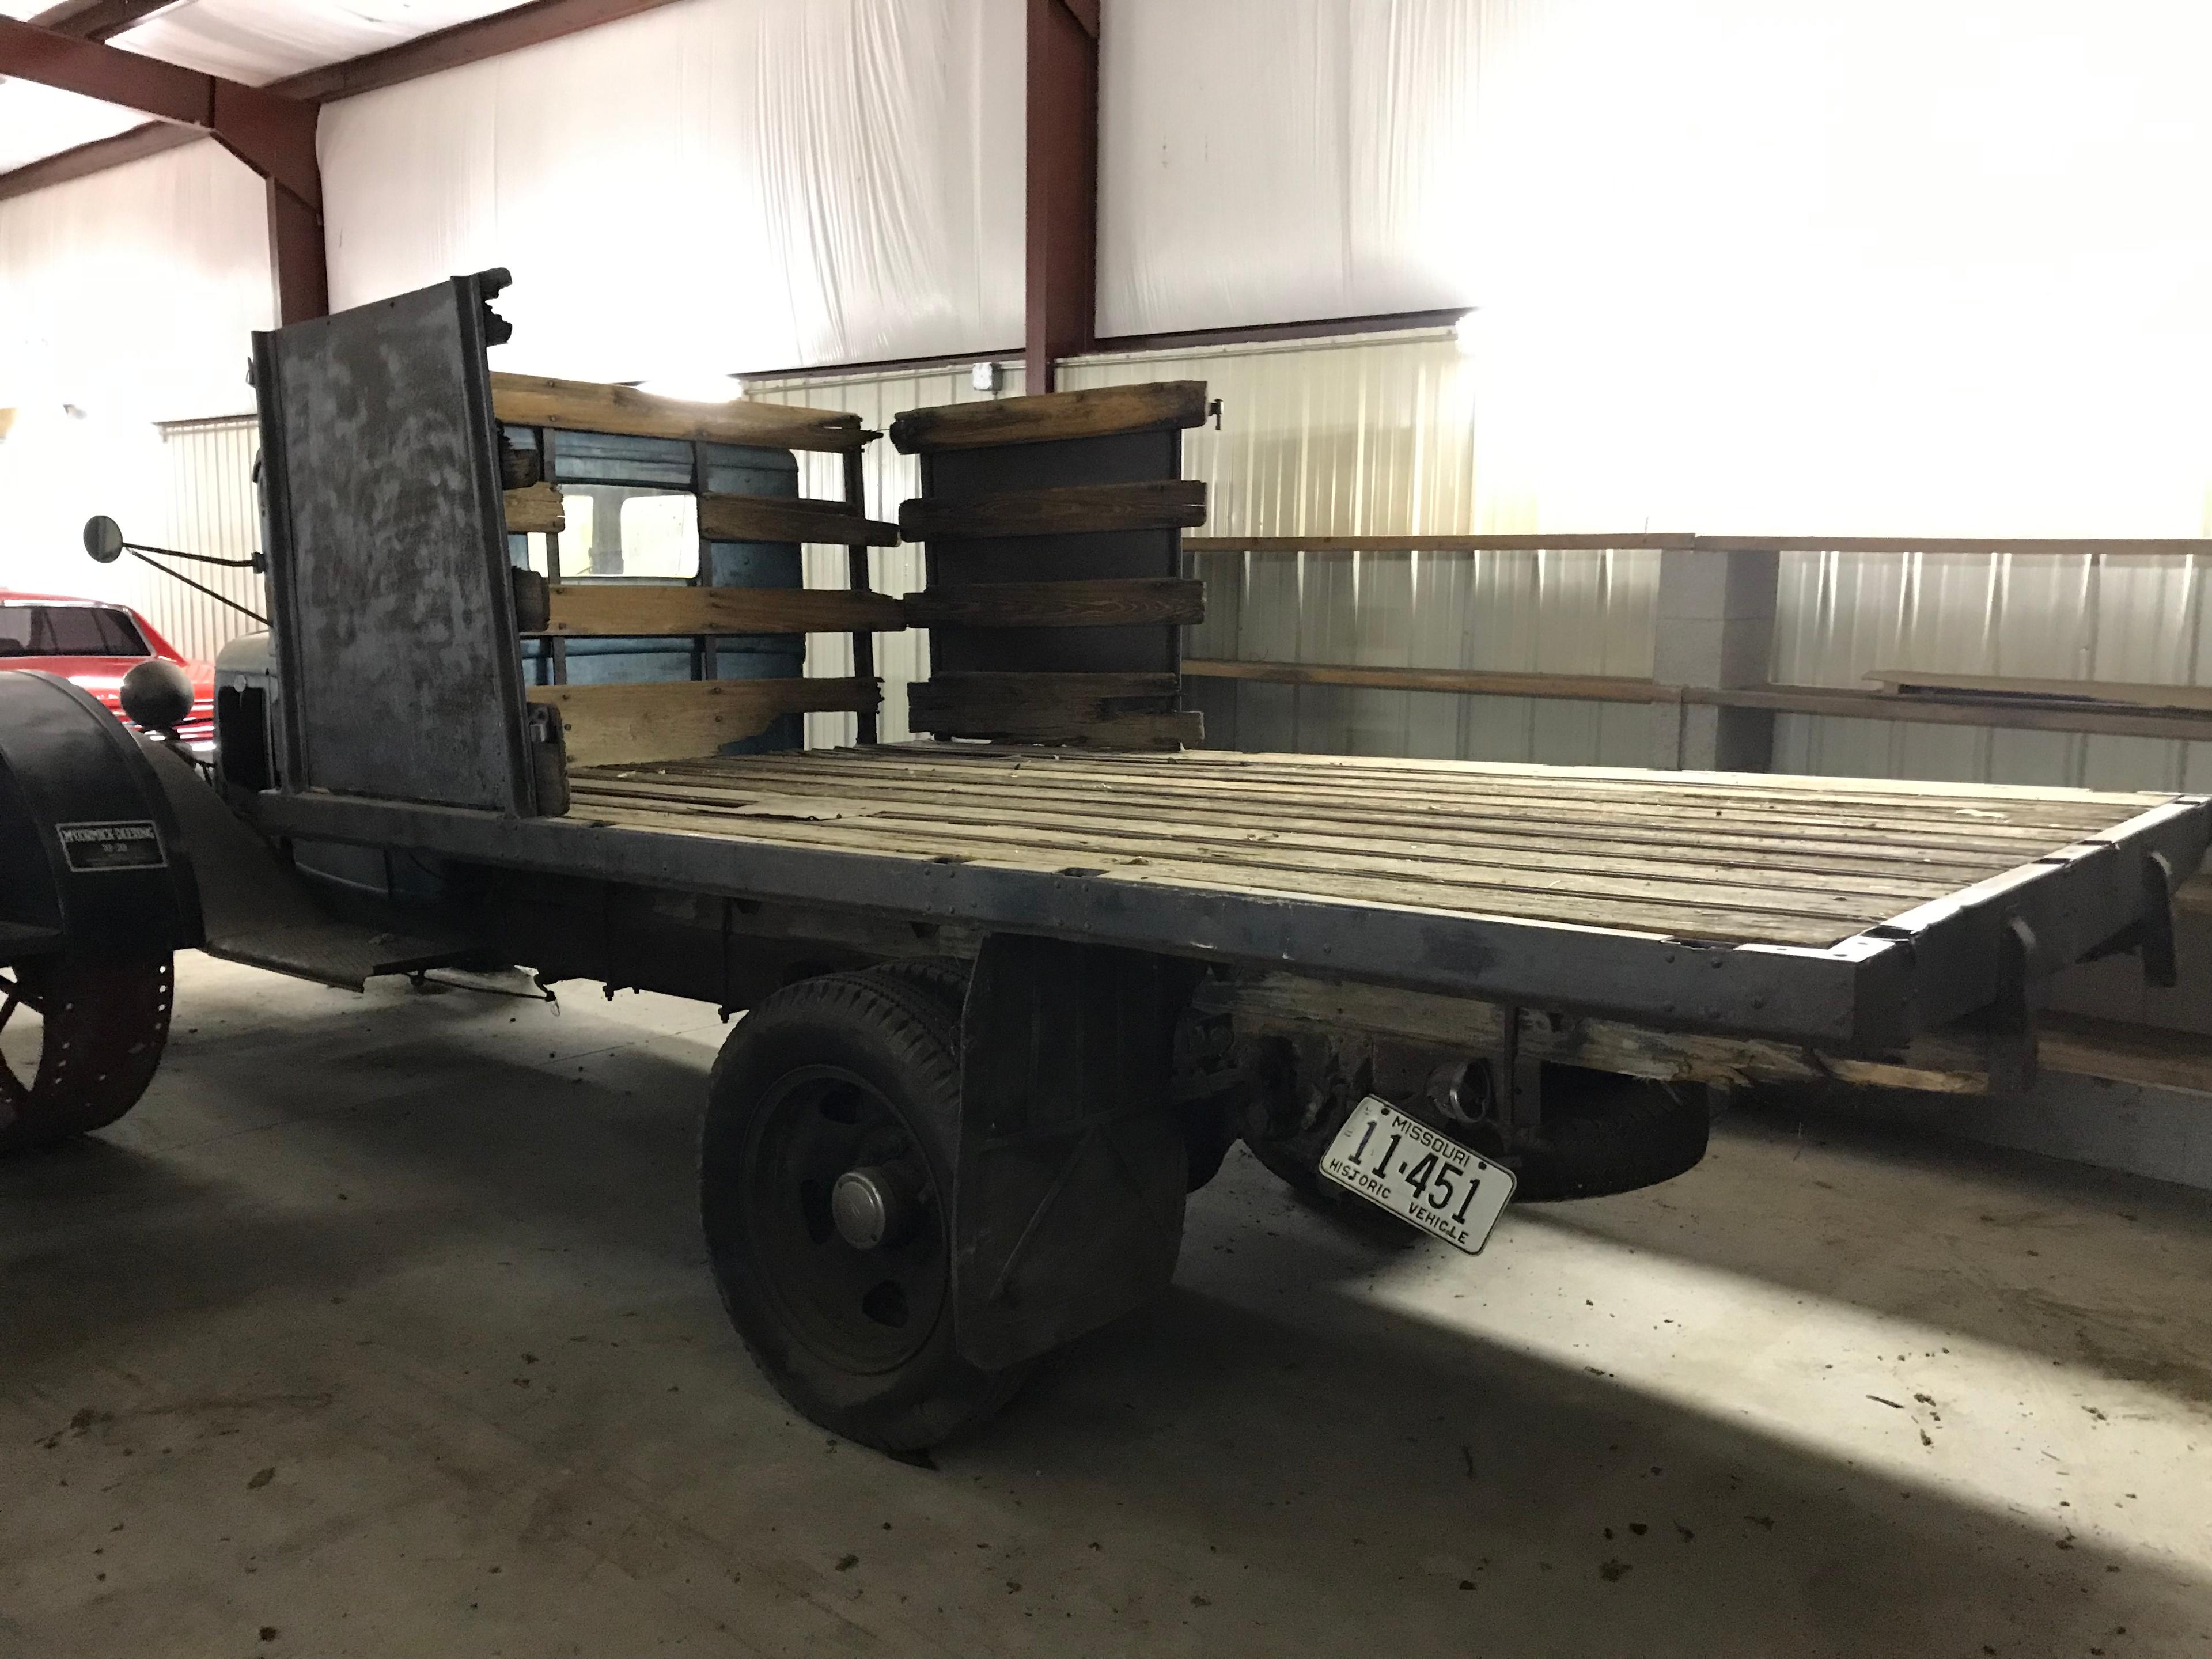 LOT 13: 1934 Ford 1½-Ton Project Truck